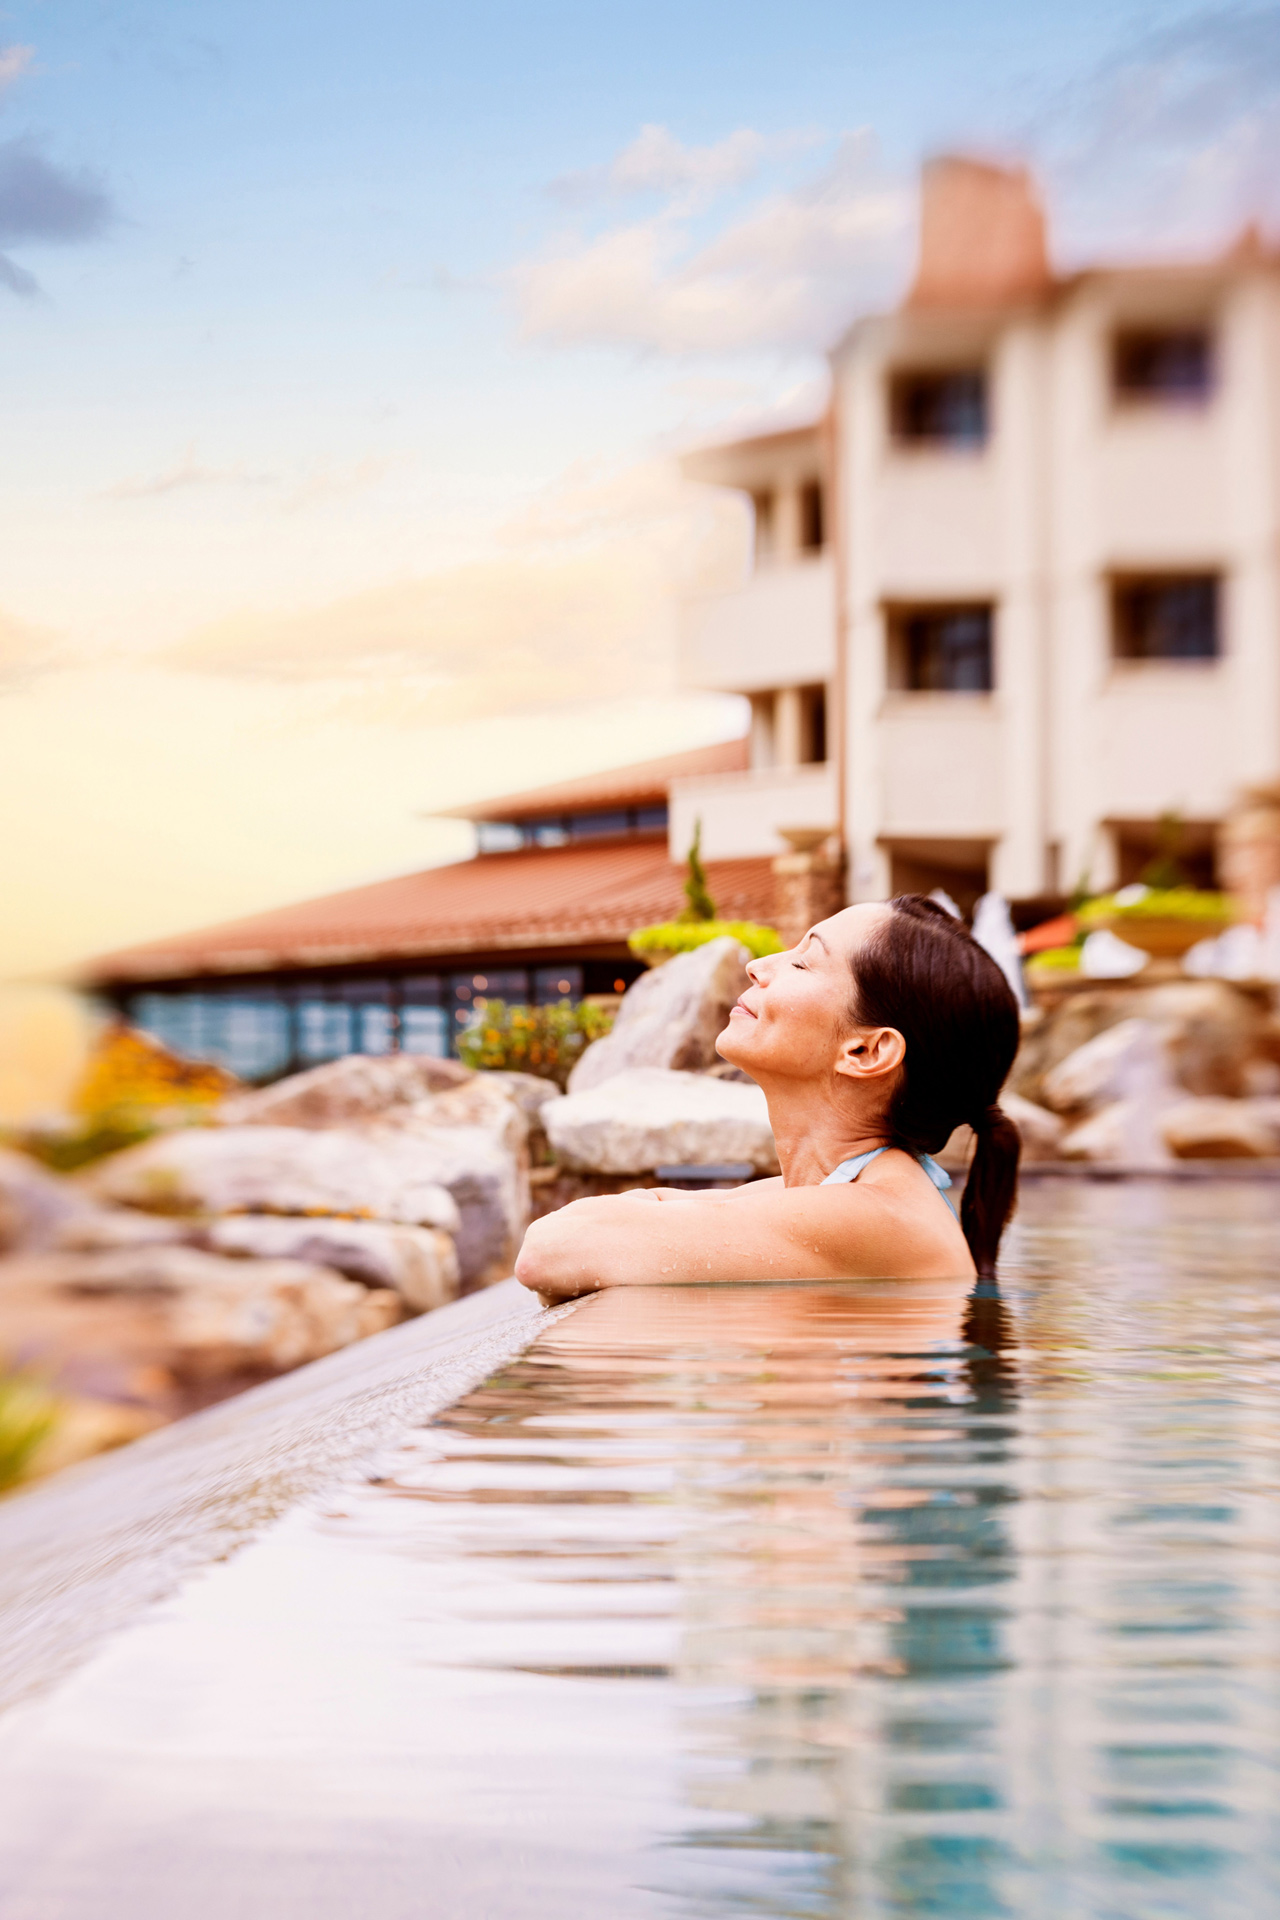 Click here to open the gallery overlay for the image: woman in an infinity pool